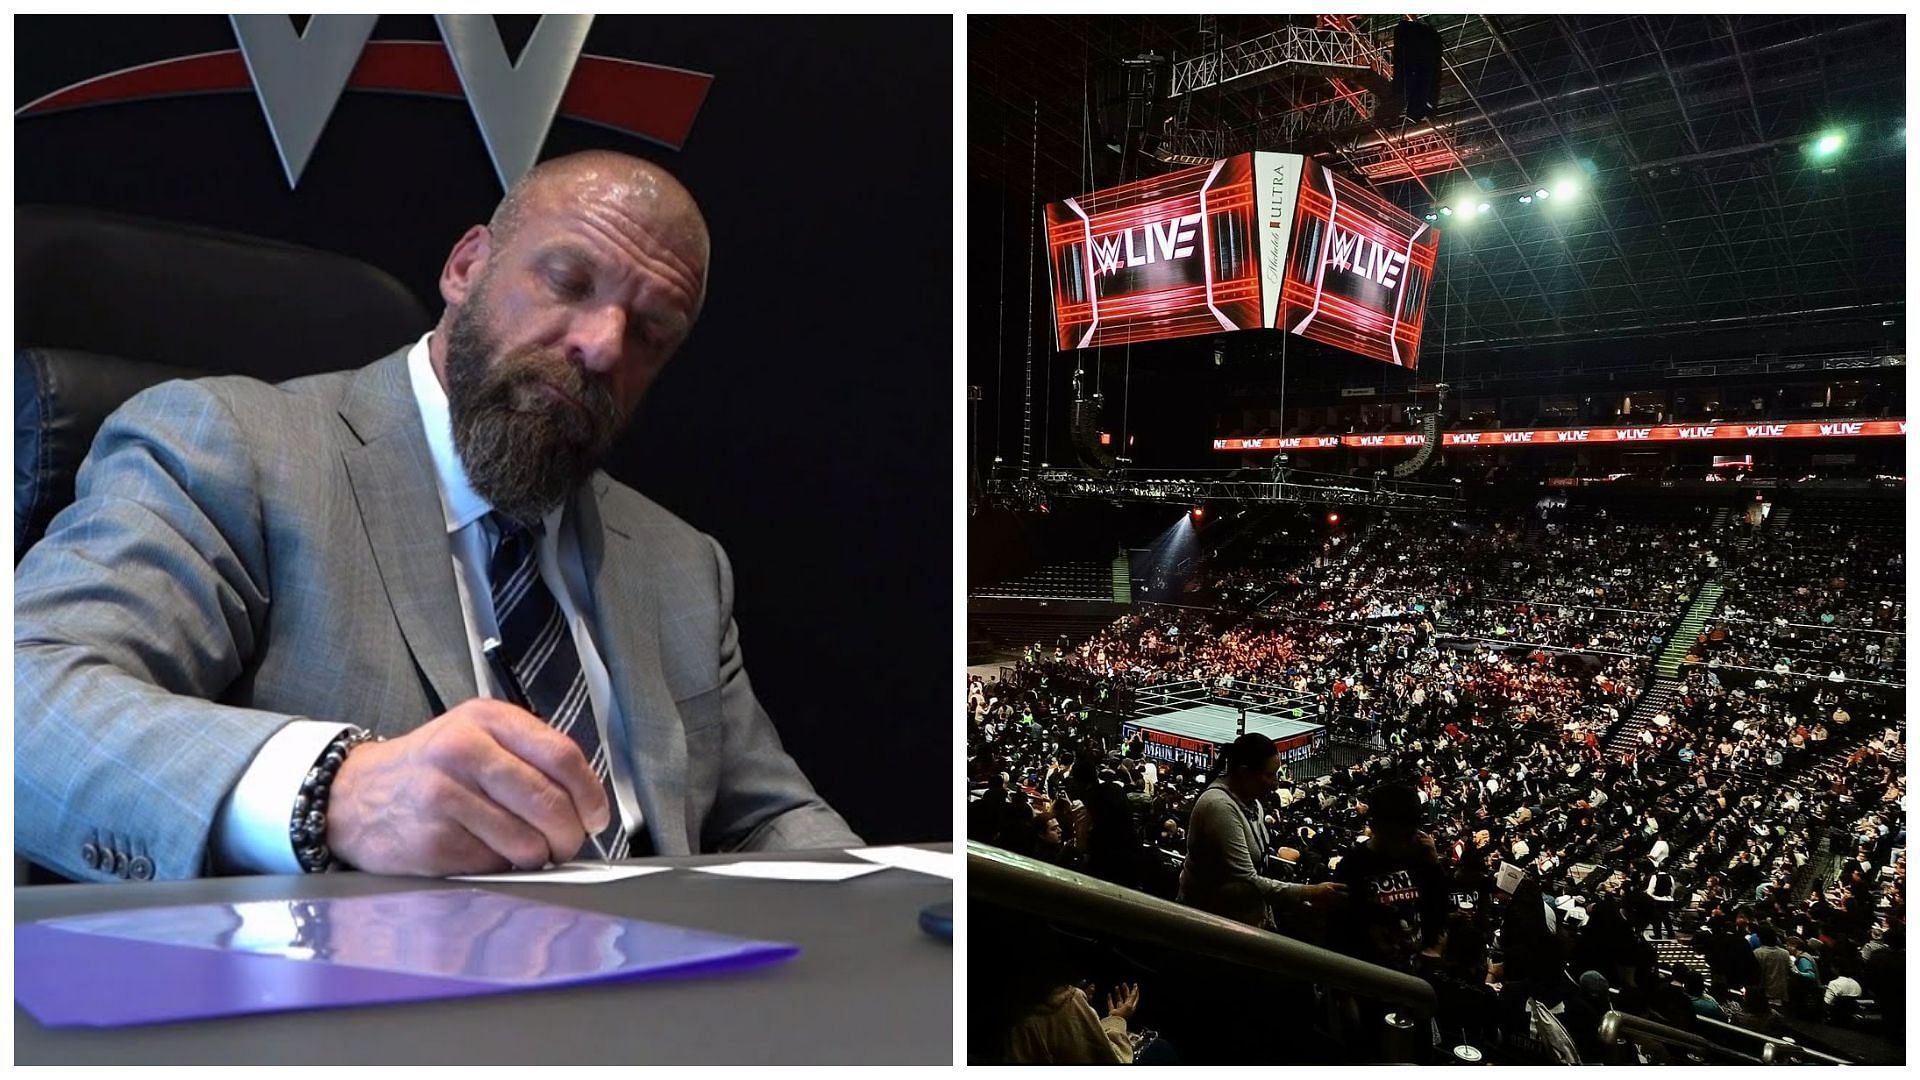 Triple H is the brain behind bringing this WWE show back.